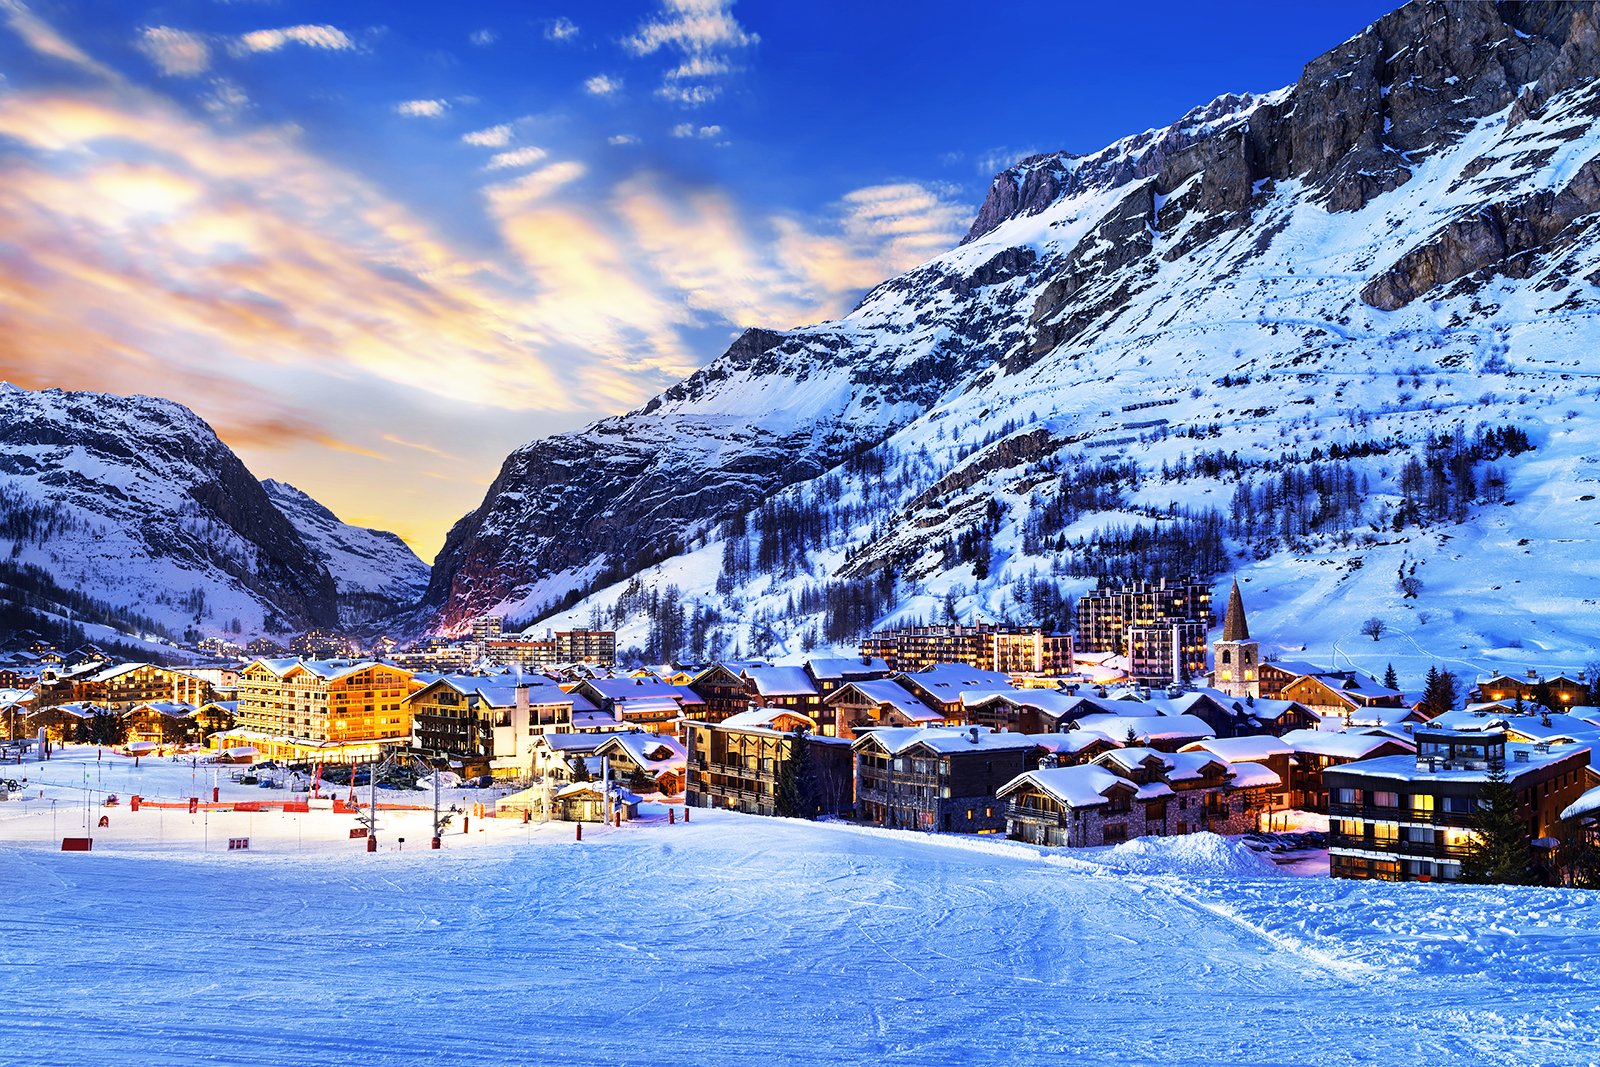 FRANCE CONFIRMS COVID RULES FOR SKI RESORTS 2021